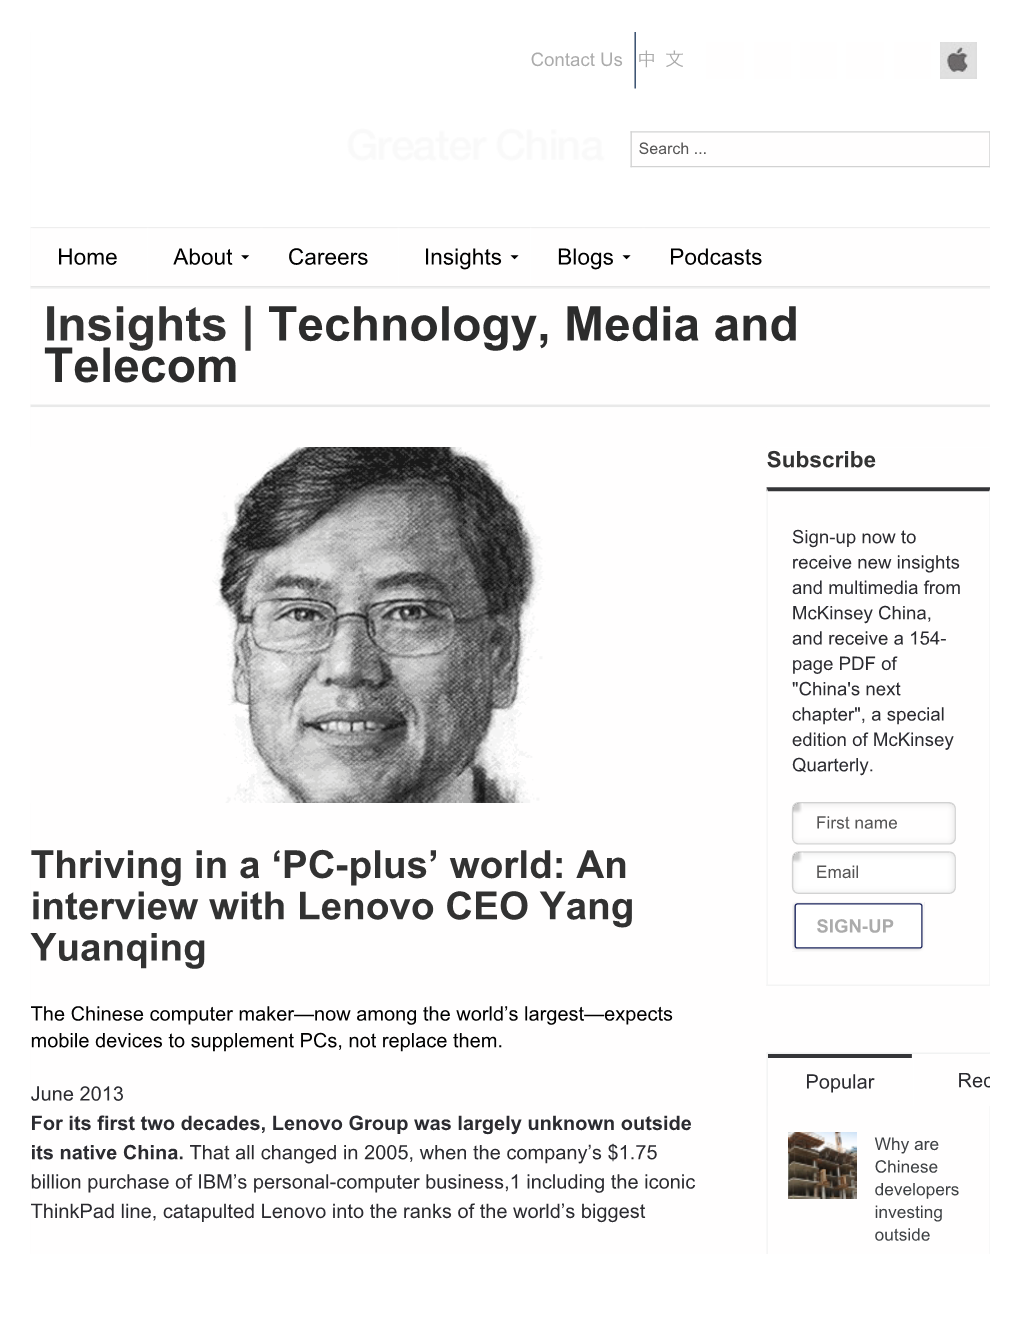 An Interview with Lenovo CEO Yang Yuanqing